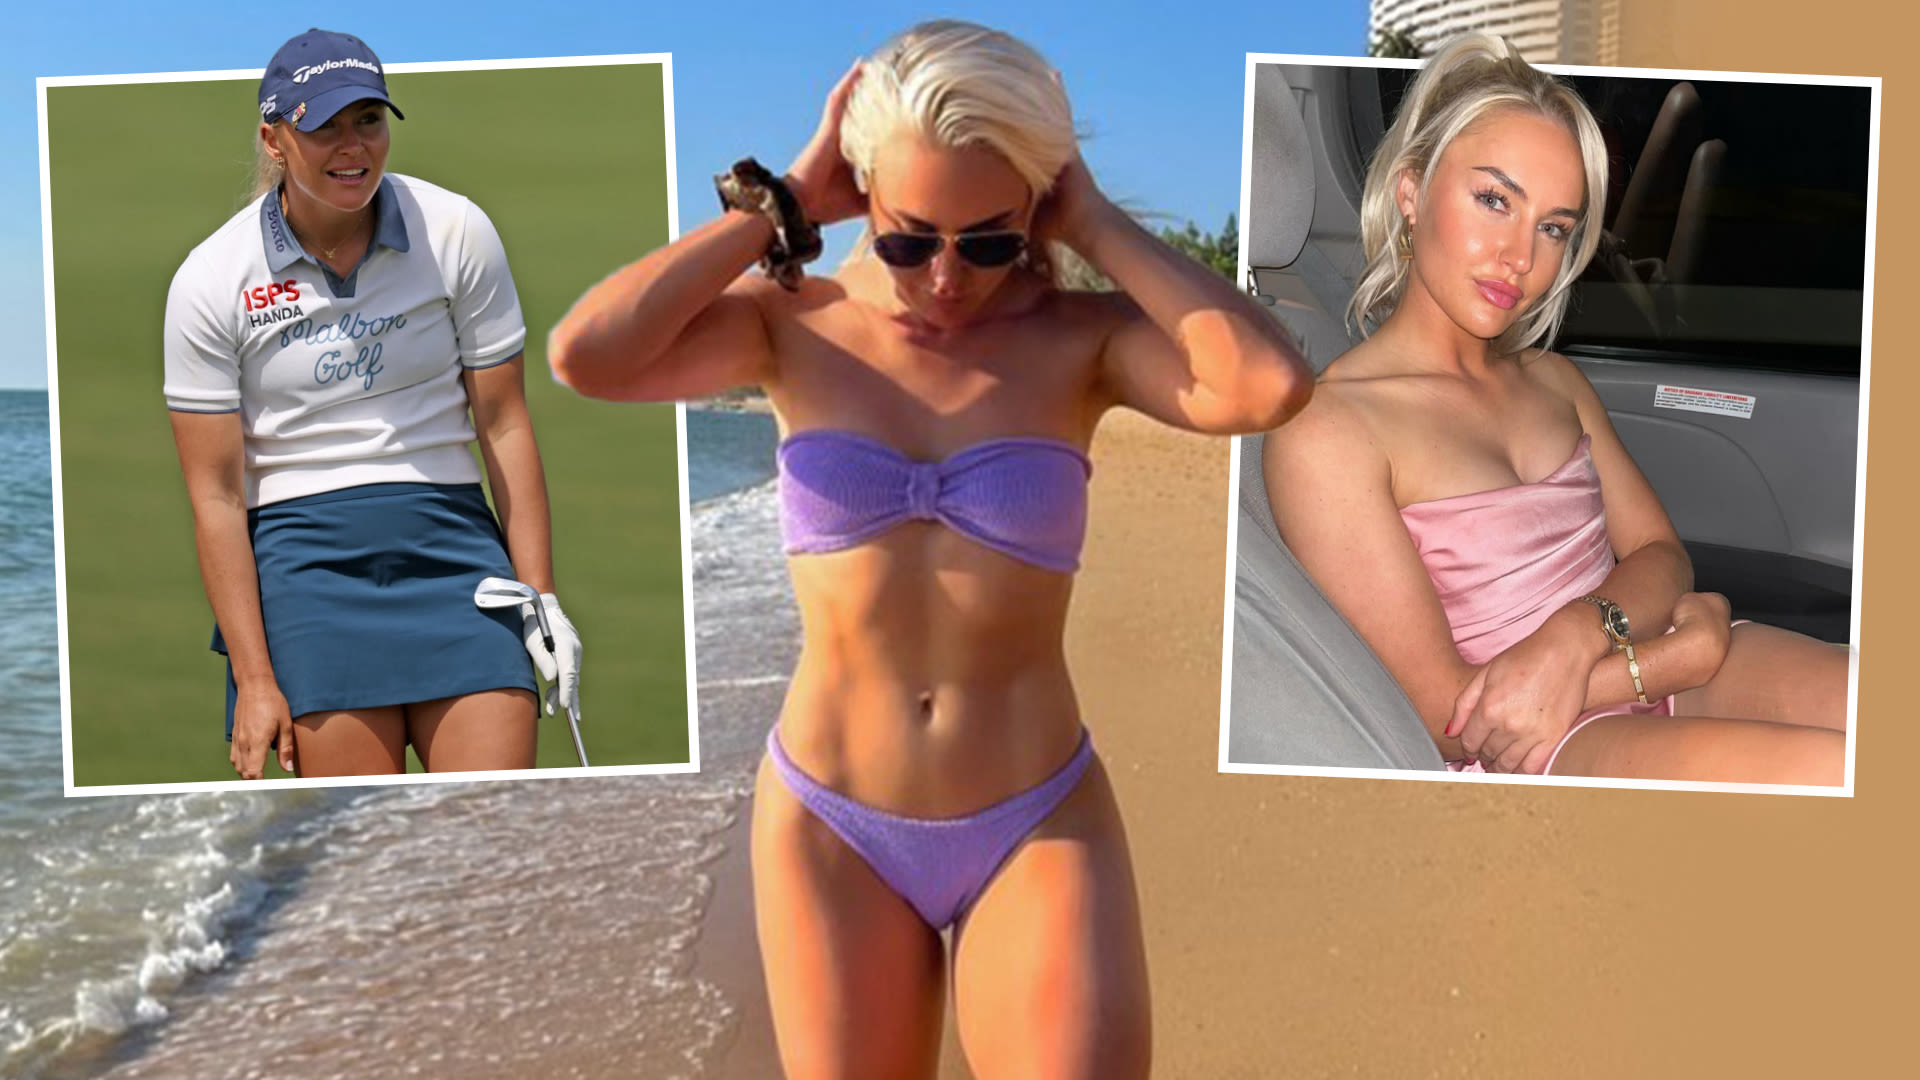 Meet golf pro Charley Hull who's huge on Instagram & dates reality TV star